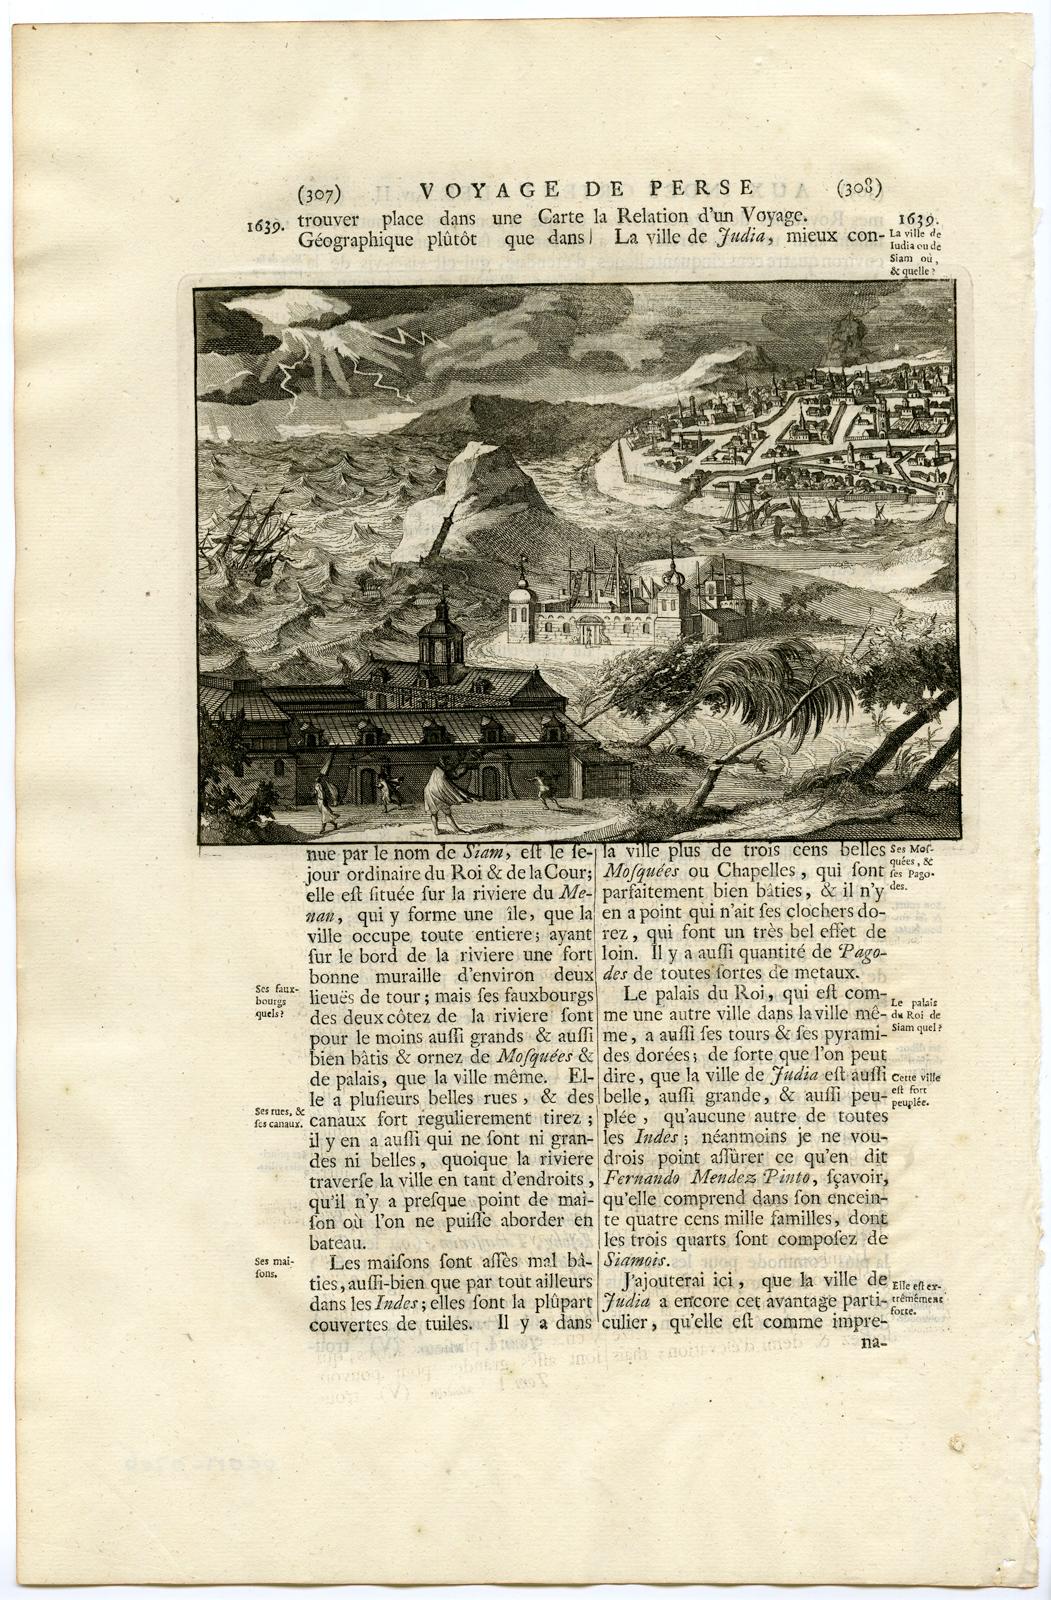 Subject: Antique print, untitled. Scarce original antique print depicting a view of Judea (Ayutthaya) in Siam/Thailand , an important VOC trading post opened in 1608. Text on verso.
 
 Description: From: 'Les Voyages du sieur Albert de Mandelslo'